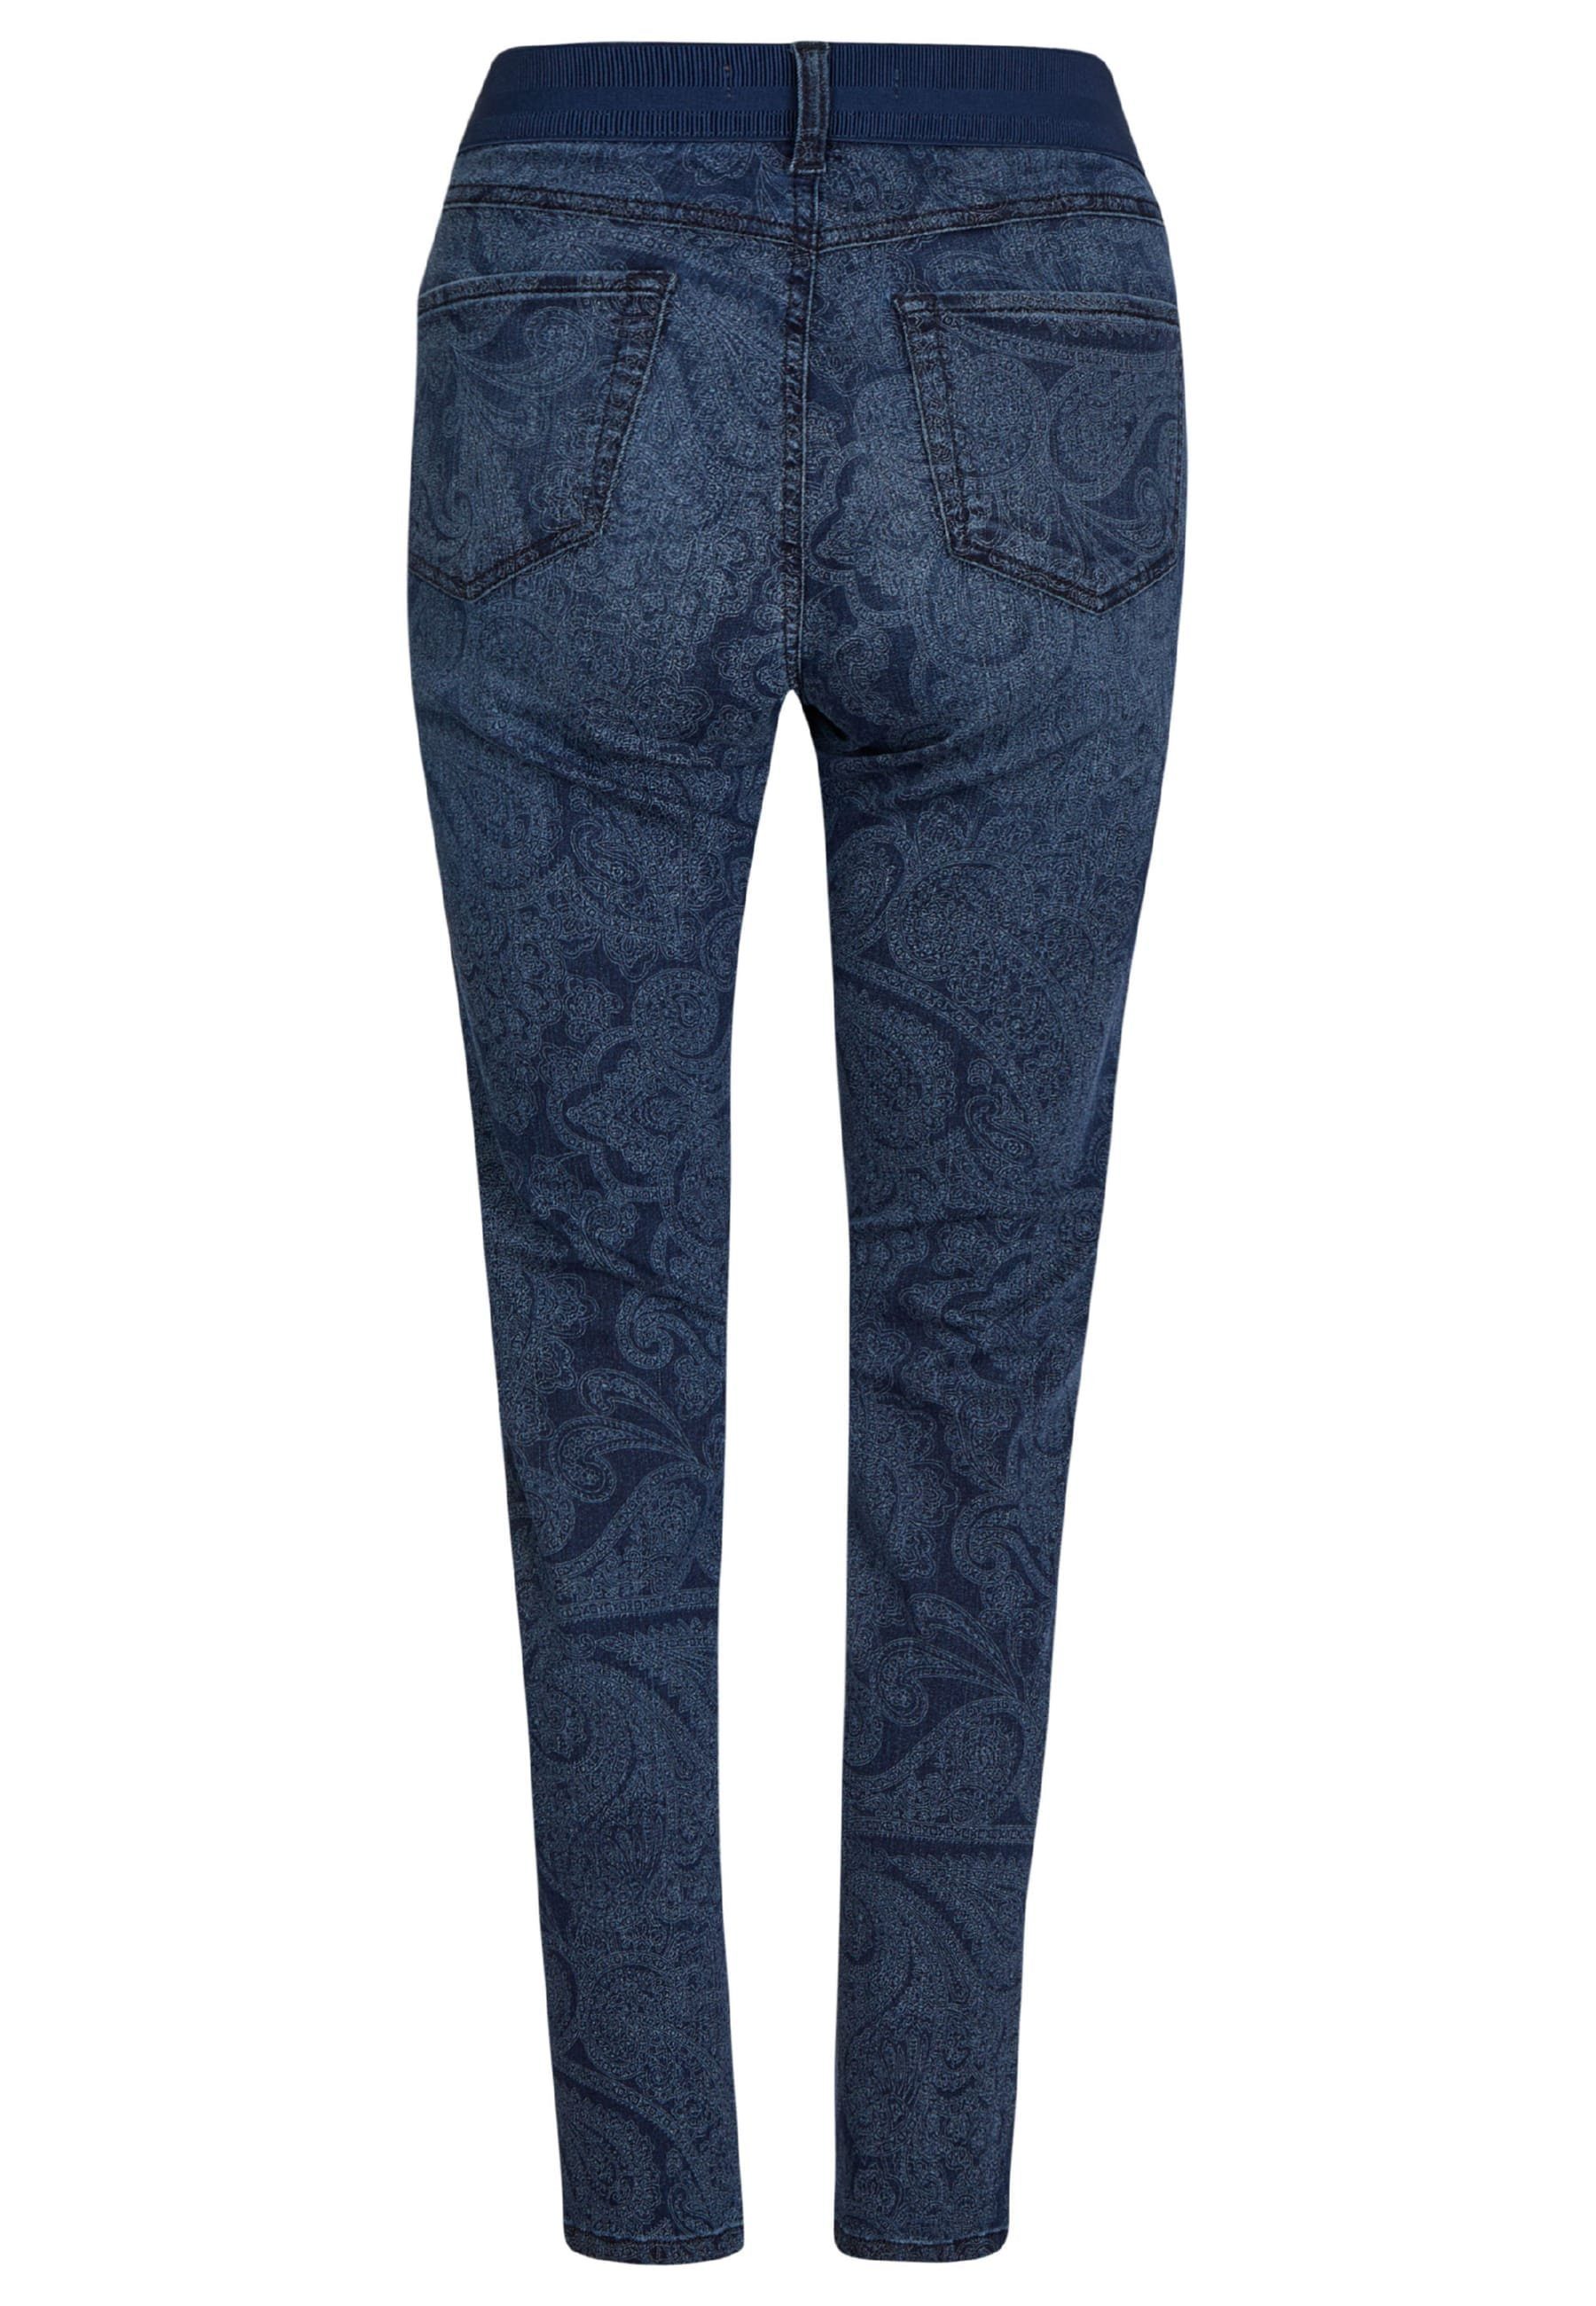 ANGELS Jeans Slim-fit-Jeans mit Size Label-Applikationen blue One Paisley-Muster mit